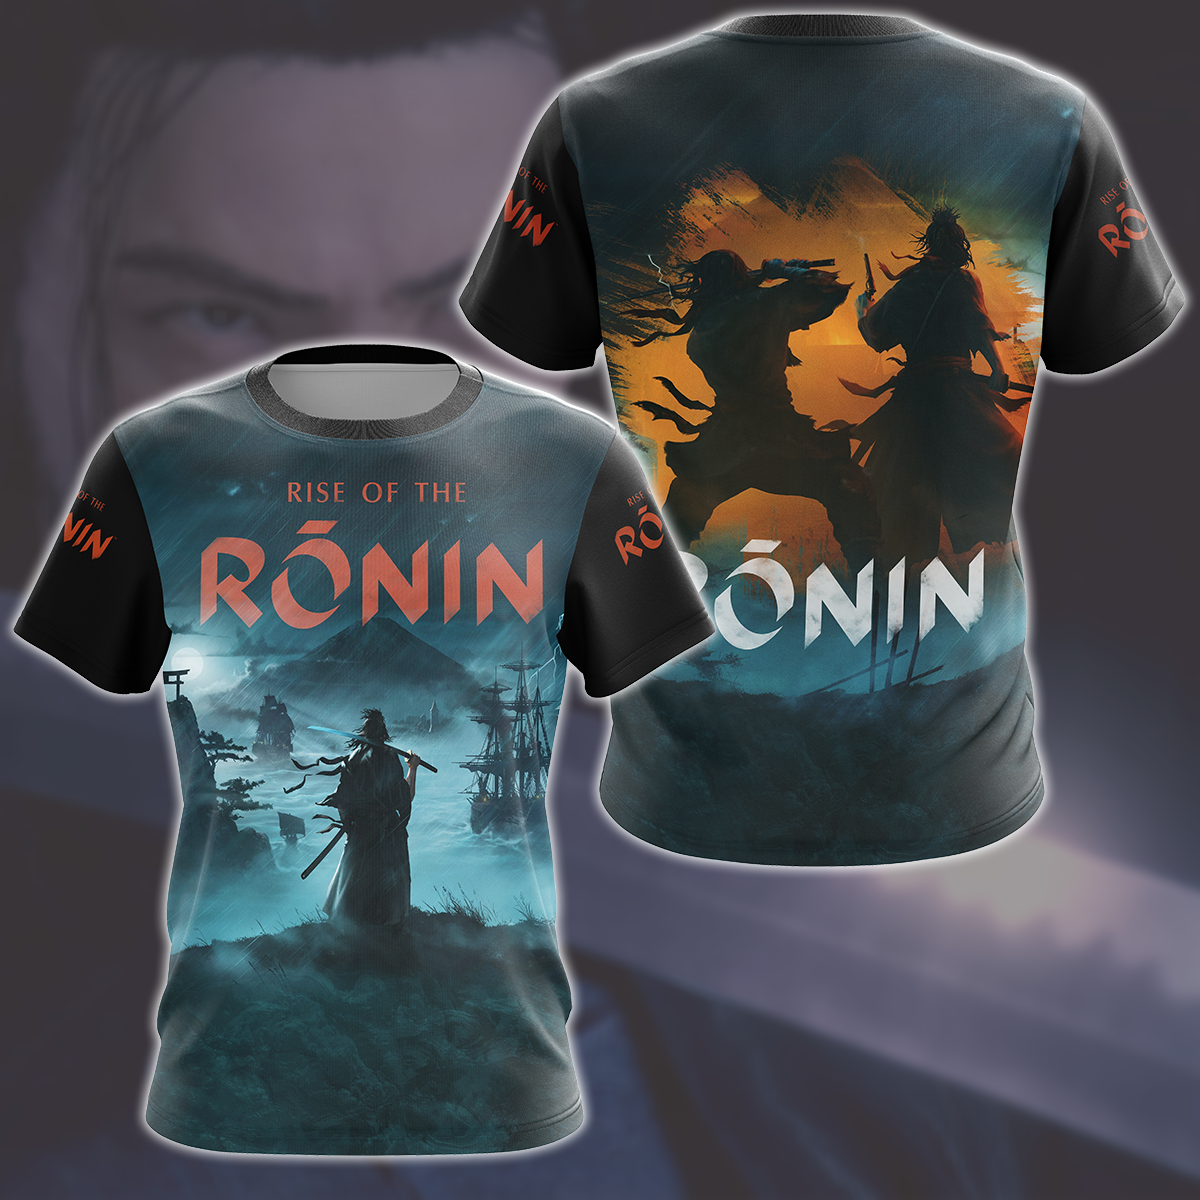 Rise of the Ronin Video Game All Over Printed T-shirt Tank Top Zip Hoodie Pullover Hoodie Hawaiian Shirt Beach Shorts Joggers T-shirt S 